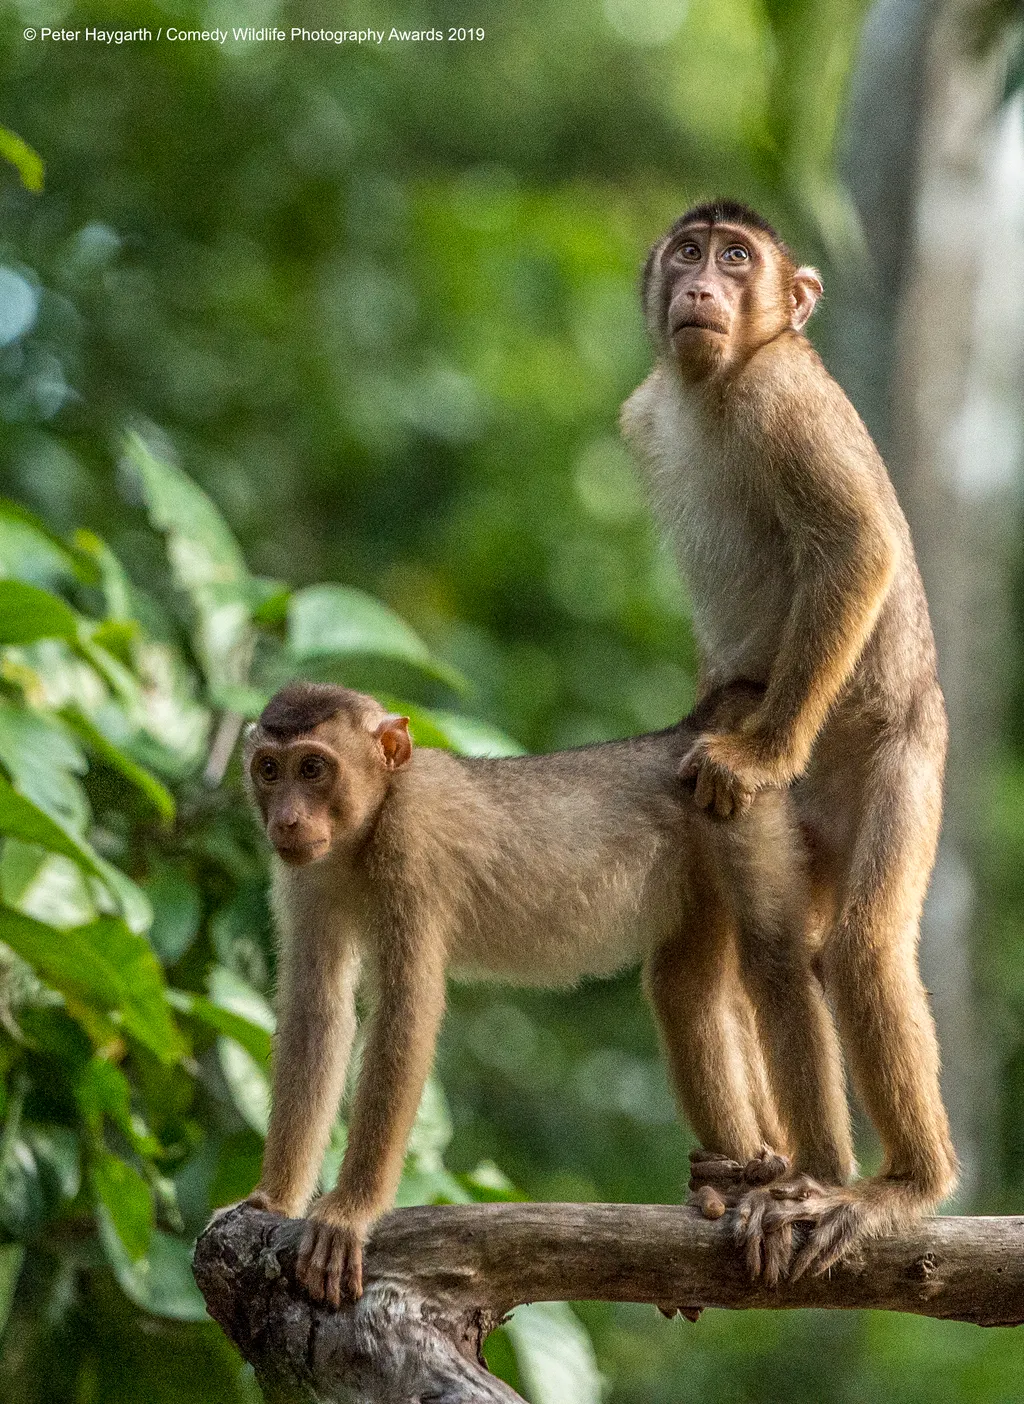 The Comedy Wildlife Photography Awards 2019
Peter Haygarth
Bishop Auckland
United Kingdom
Phone: 07548308000
Email: peterhaygarth@hotmail.com
Title: Caught in the act
Description: Pair of young Pigtail Macaques experimenting with life
Animal: Pigtail Maca